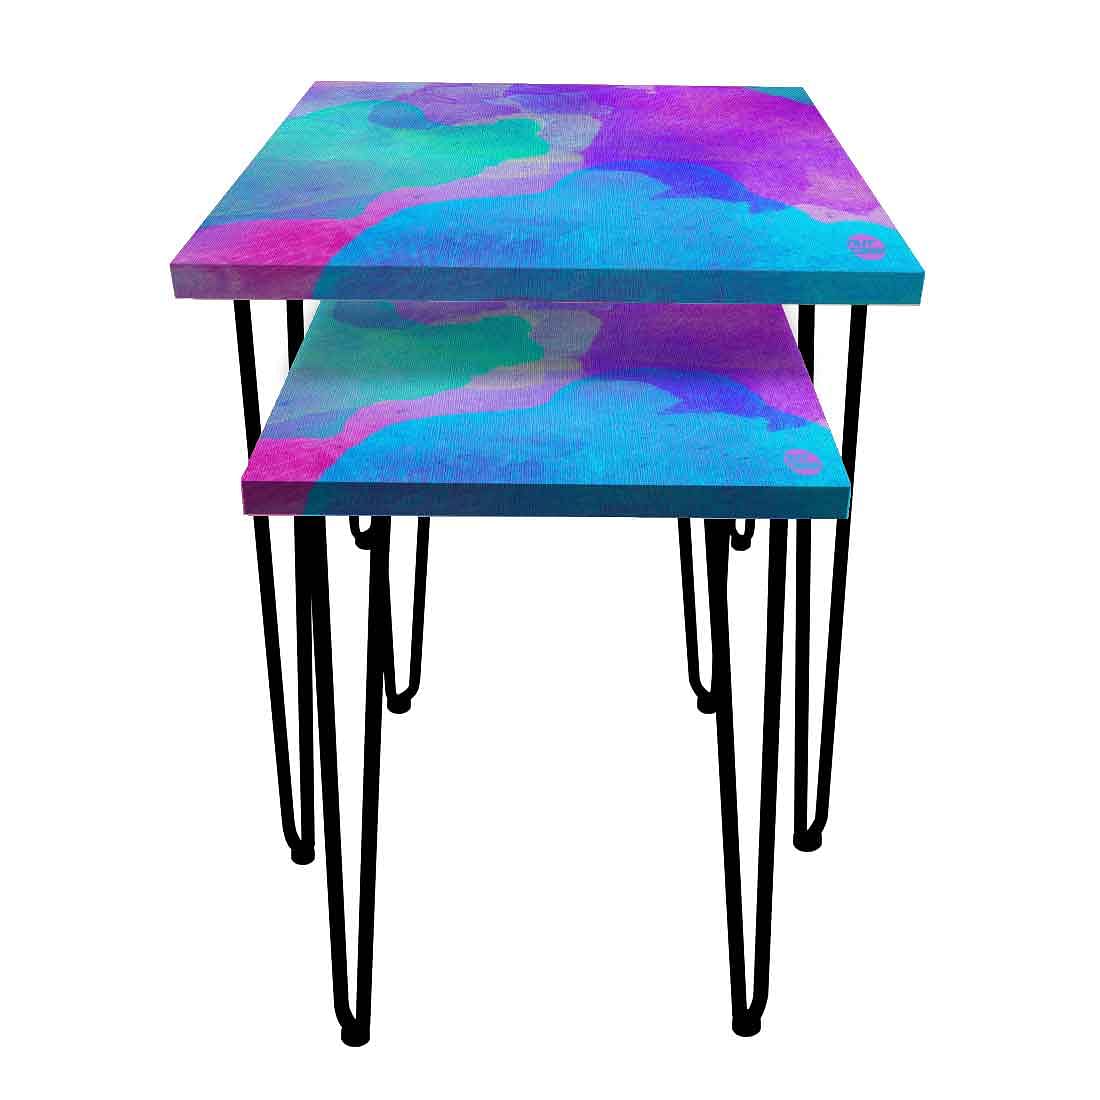 Nesting Table Set of 2 for Living Room Balcony Patio - Blue Watercolor Nutcase